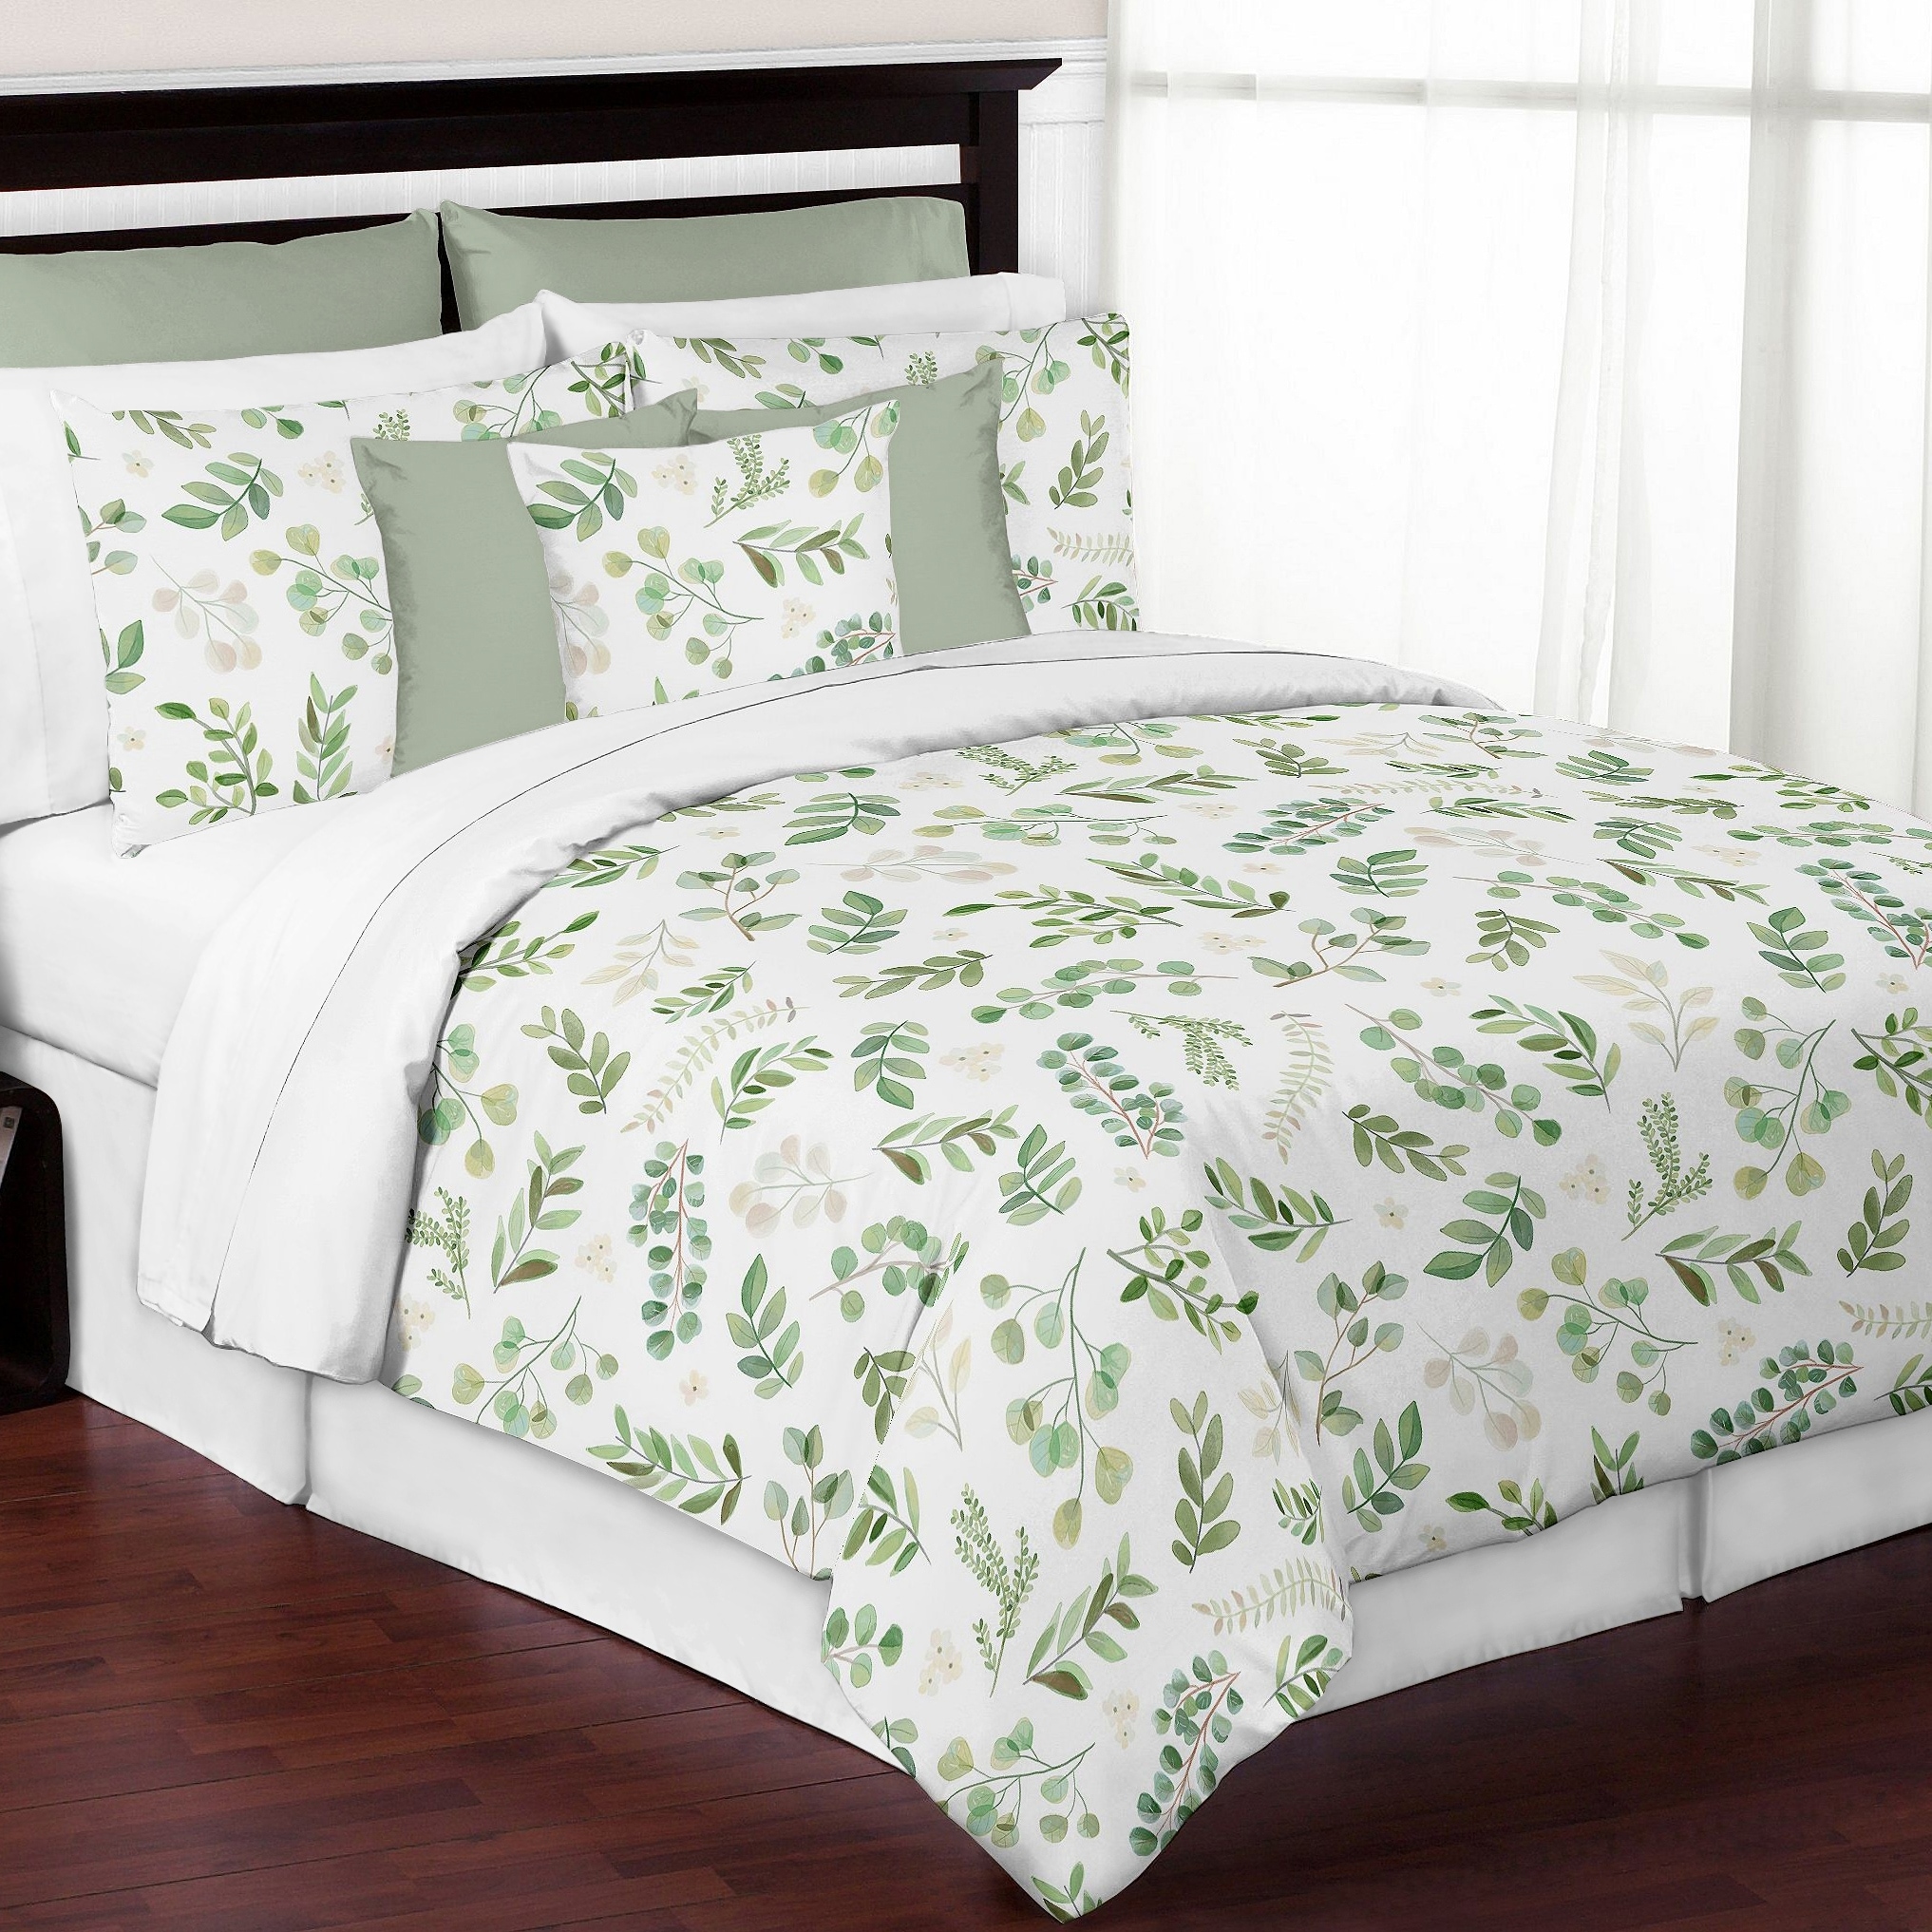 WONGS BEDDING Floral Comforter Set Queen,Sage Green Botanical Comforter  with 2 Pillowcases,Yellow Flower and Green Leaves Print 3 Pieces Bedding  Set